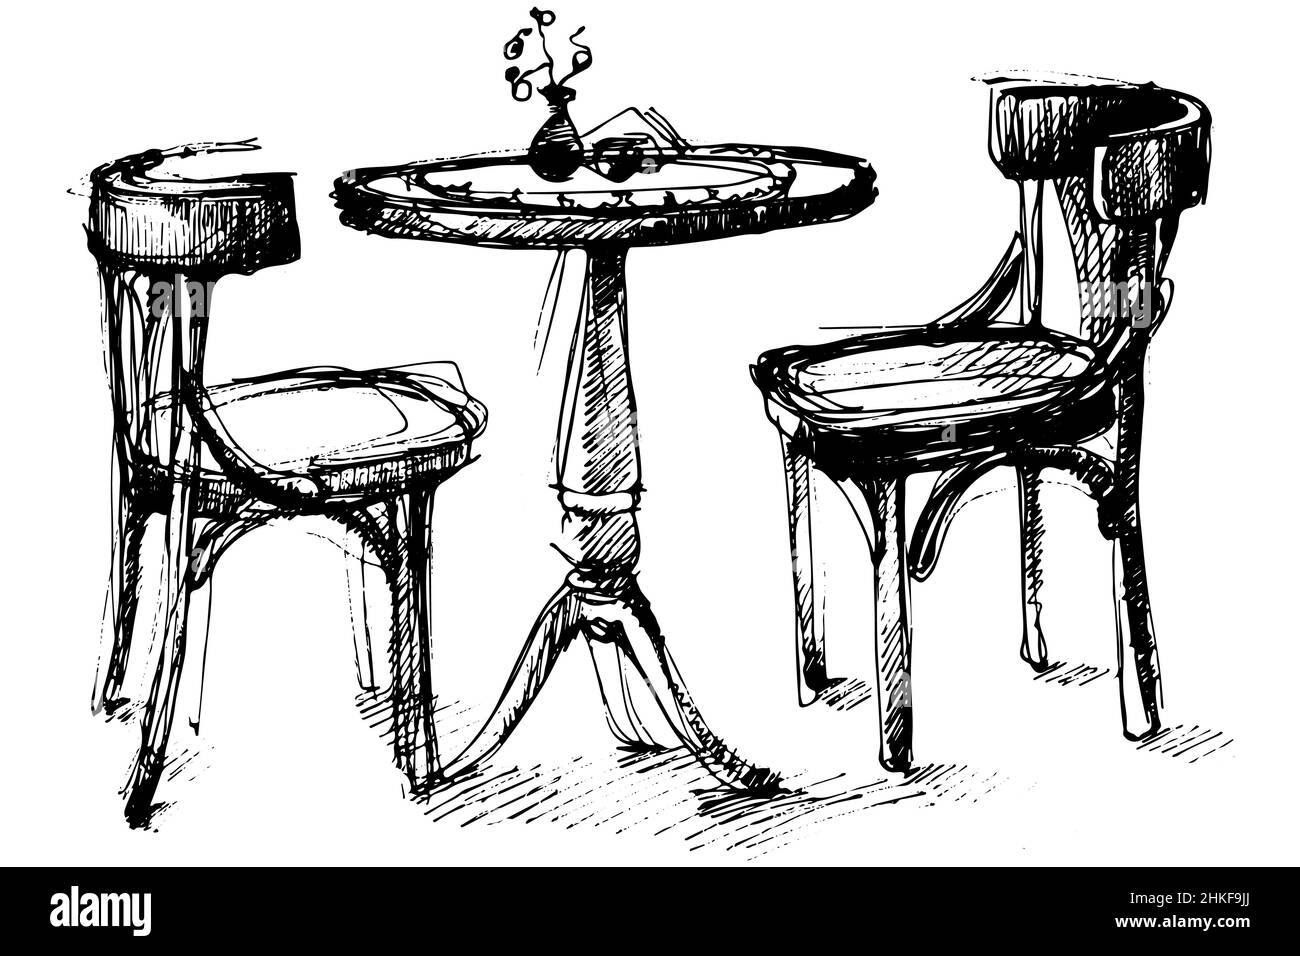 Detail drawing of table and chair in AutoCAD 2D dwg file CAD file   Cadbull